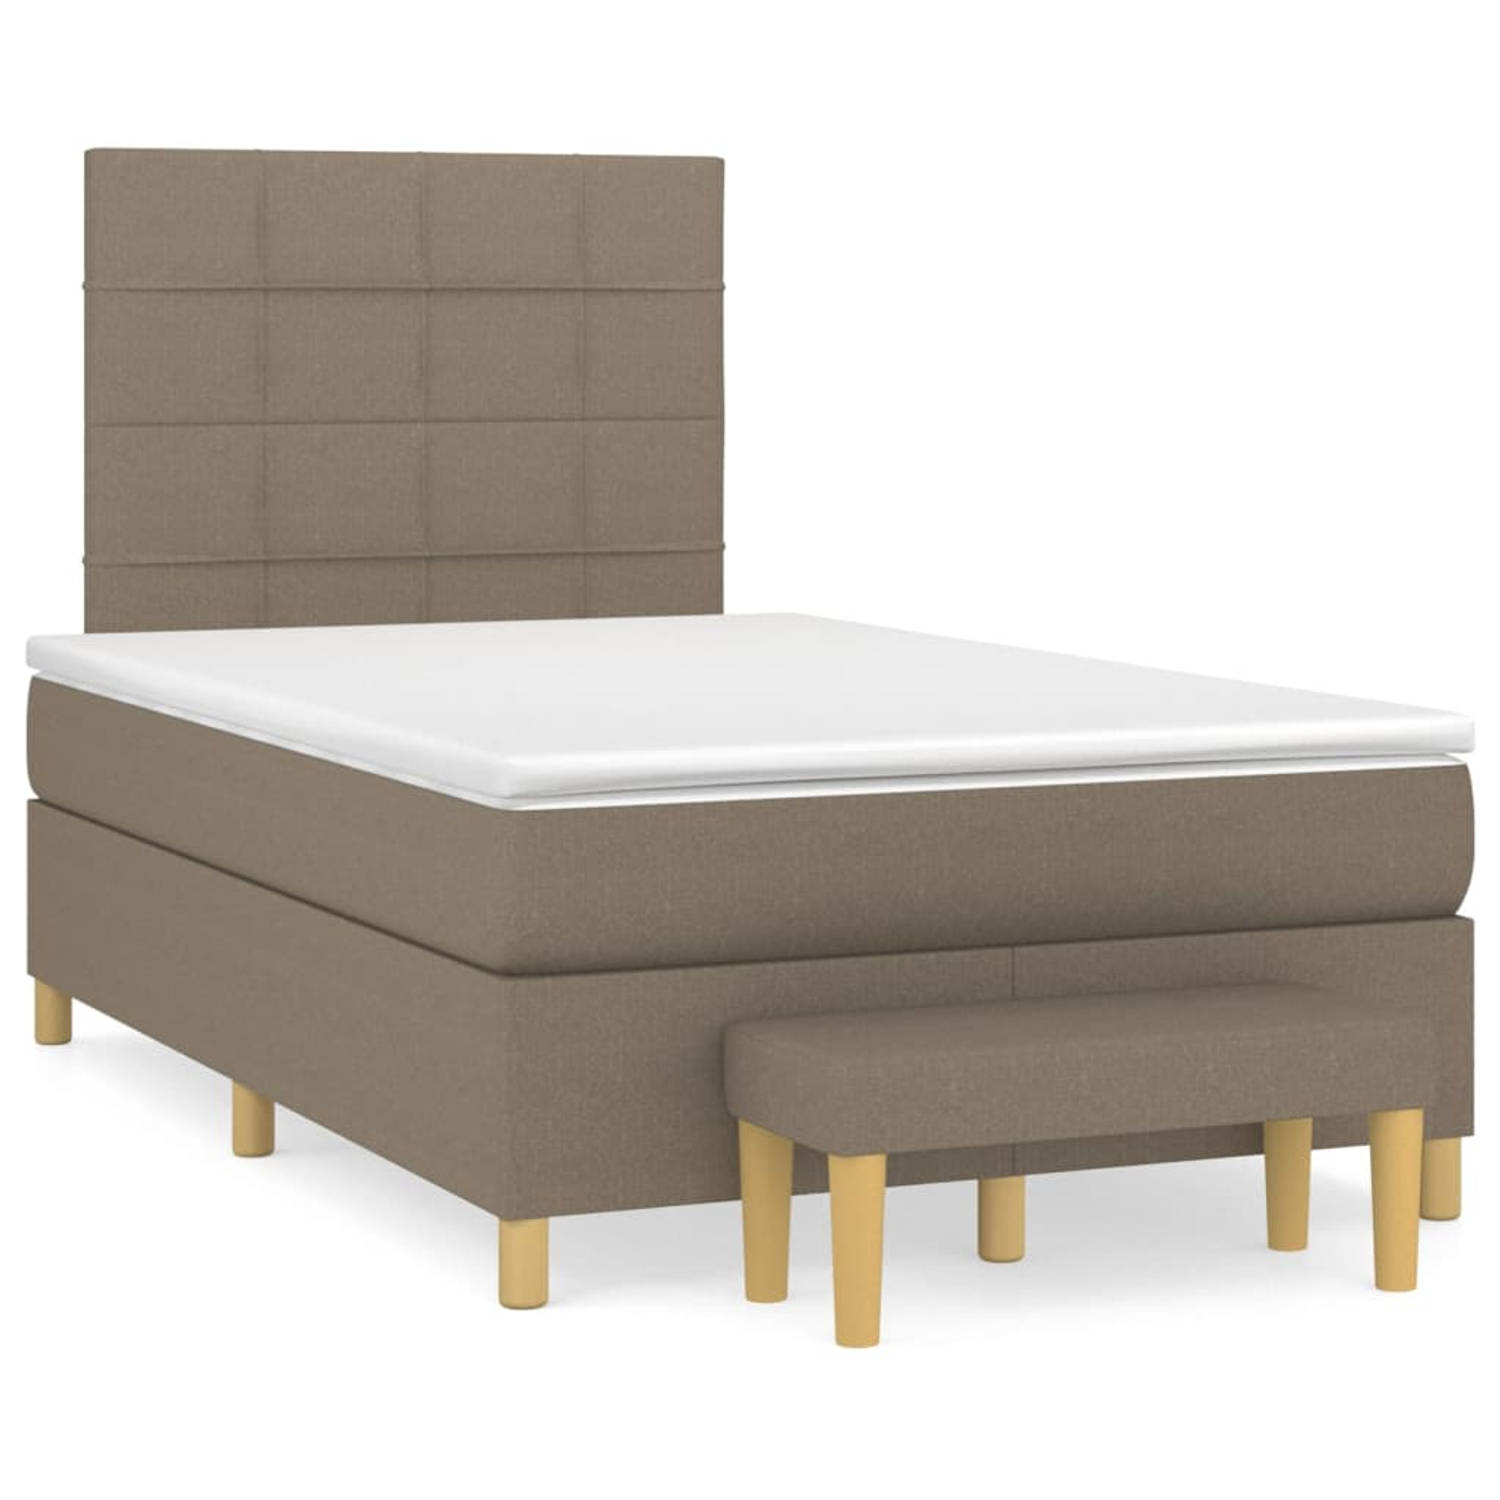 The Living Store Boxspringbed Bankje - 203 x 120 x 118/128 cm - Taupe - 100% polyester - Multiplex en bewerkt hout